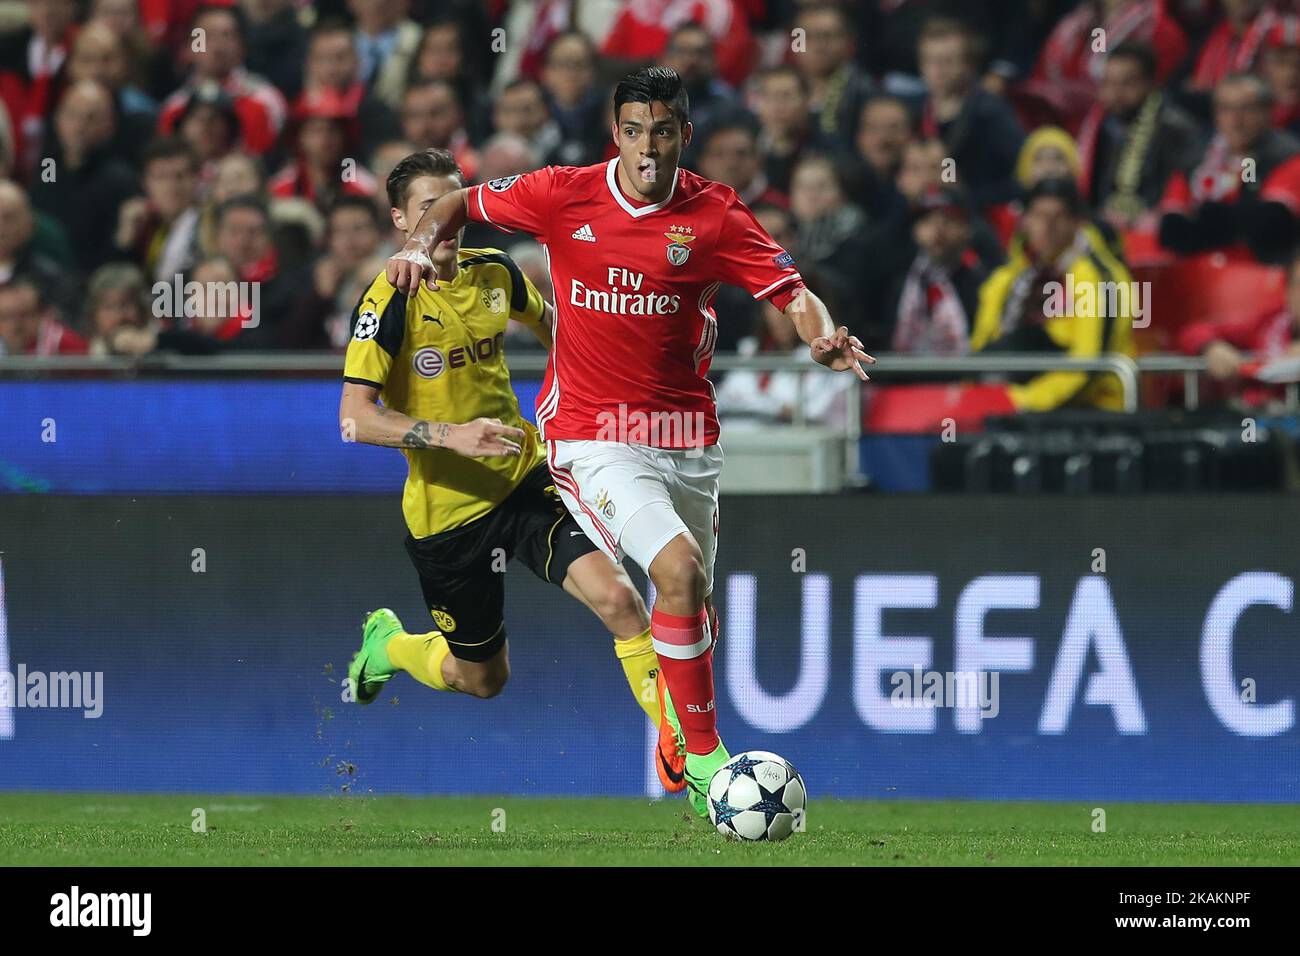 Benficas forward Raul Jimenez from Mexico during the SL Benfica v Borussia Dortmund - UEFA Champions League16 Final match at Estadio da Luz on February 14, 2017 in Lisbon, Portugal.(Photo by Bruno Barros / DPI / NurPhoto) *** Please Use Credit from Credit Field *** Stock Photo